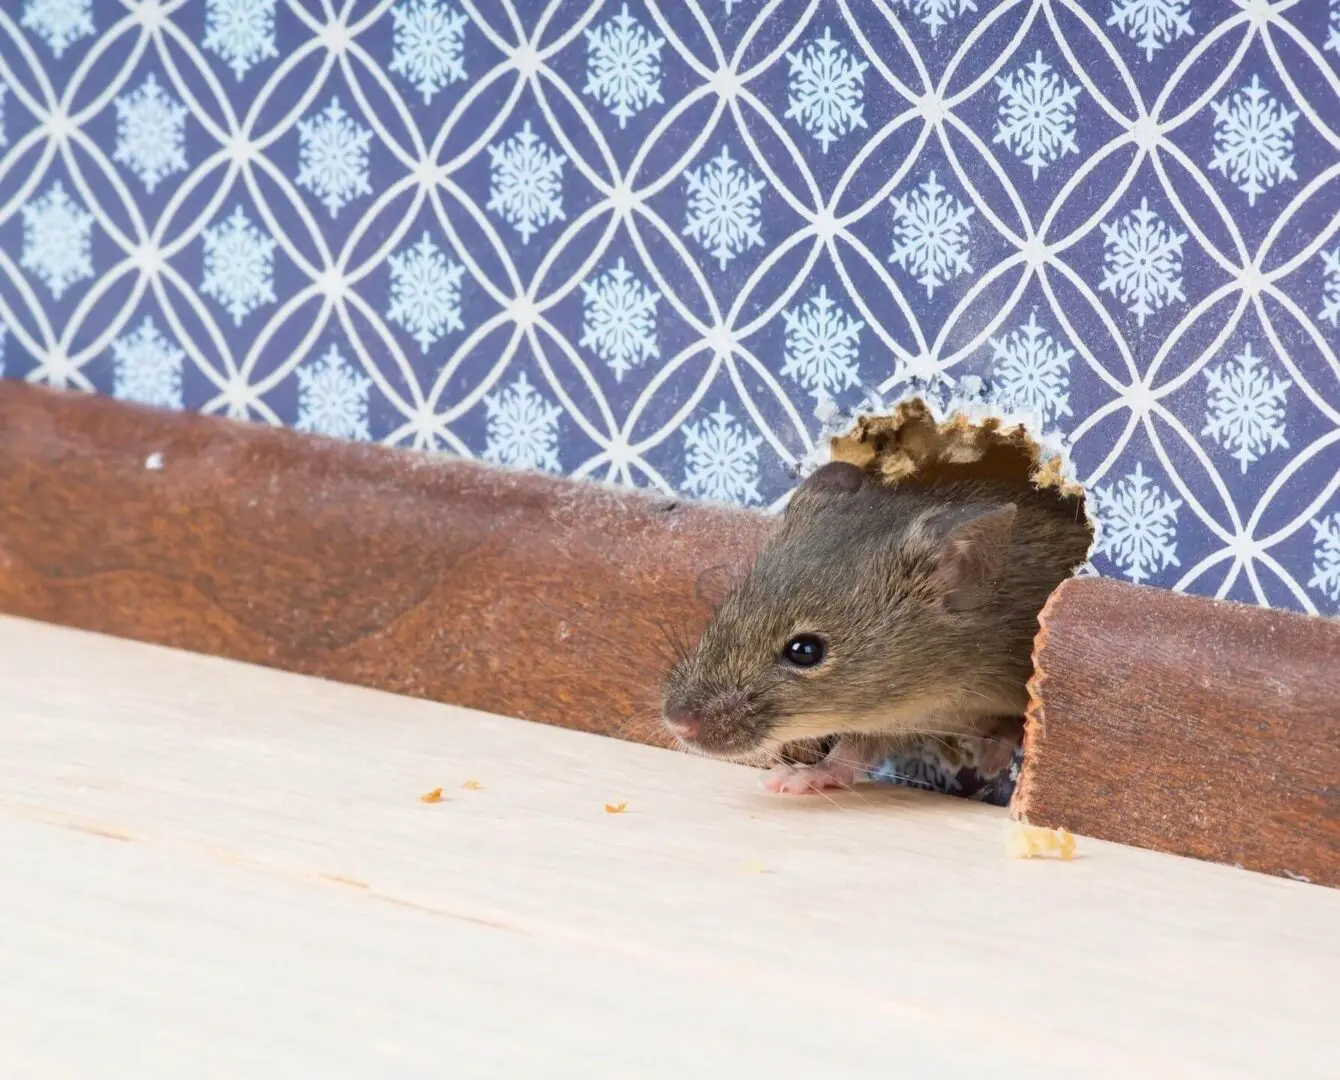 mouse gets into the room through a hole in the wall